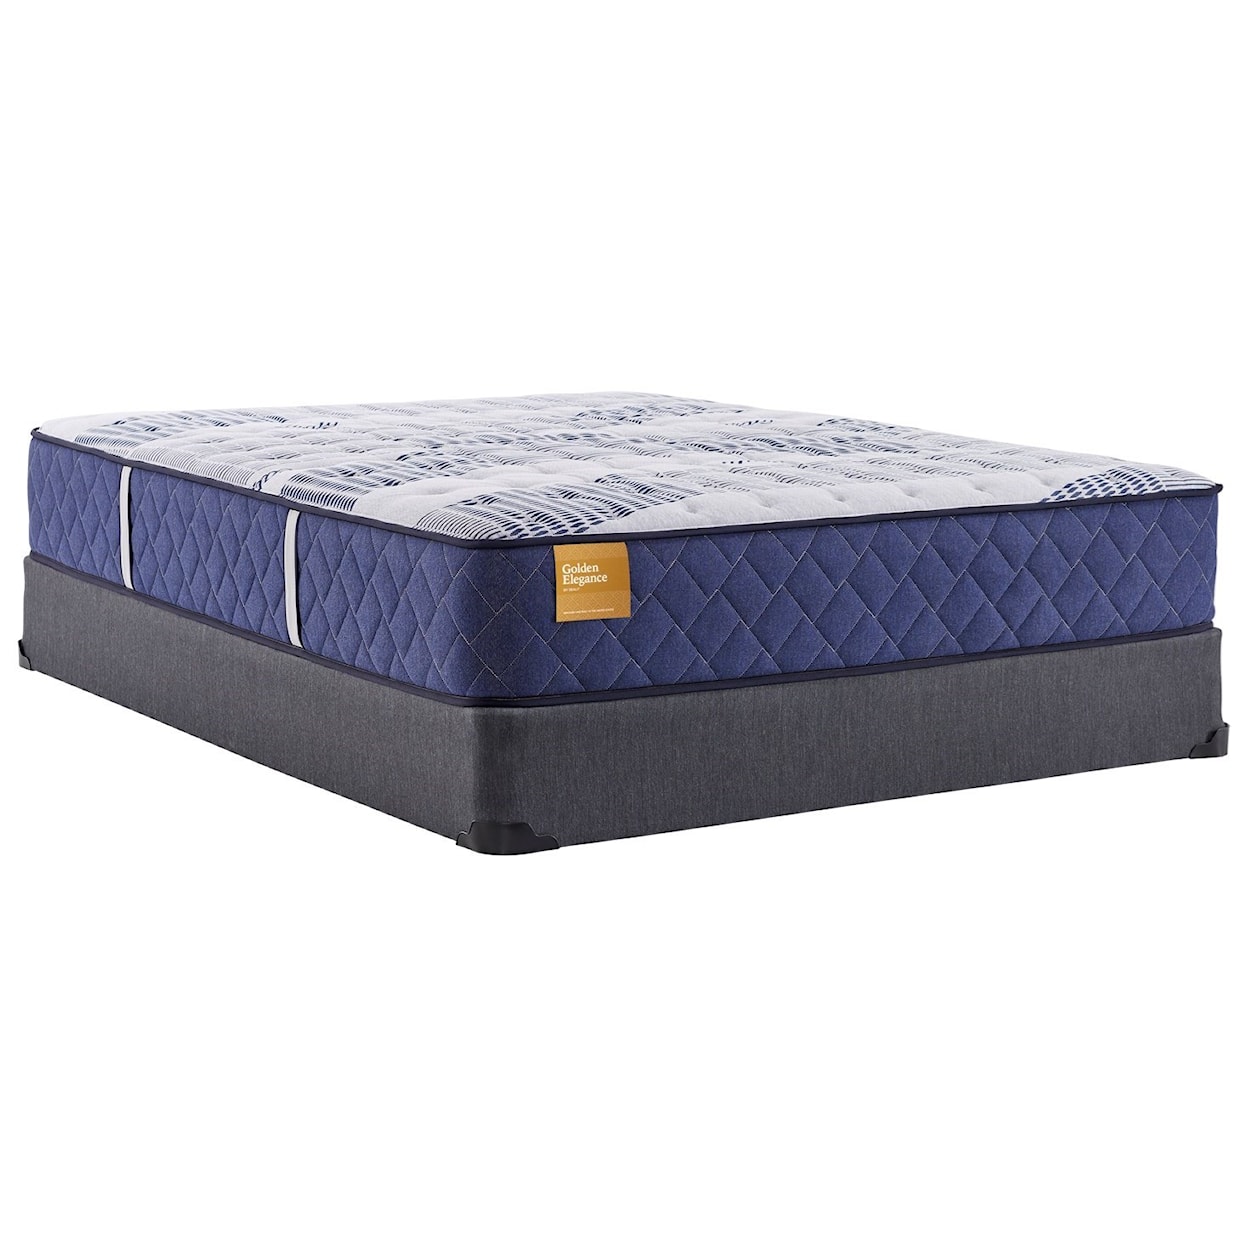 Sealy Etherial Gold Firm Twin 12 1/2" Cushion Firm Mattress Set